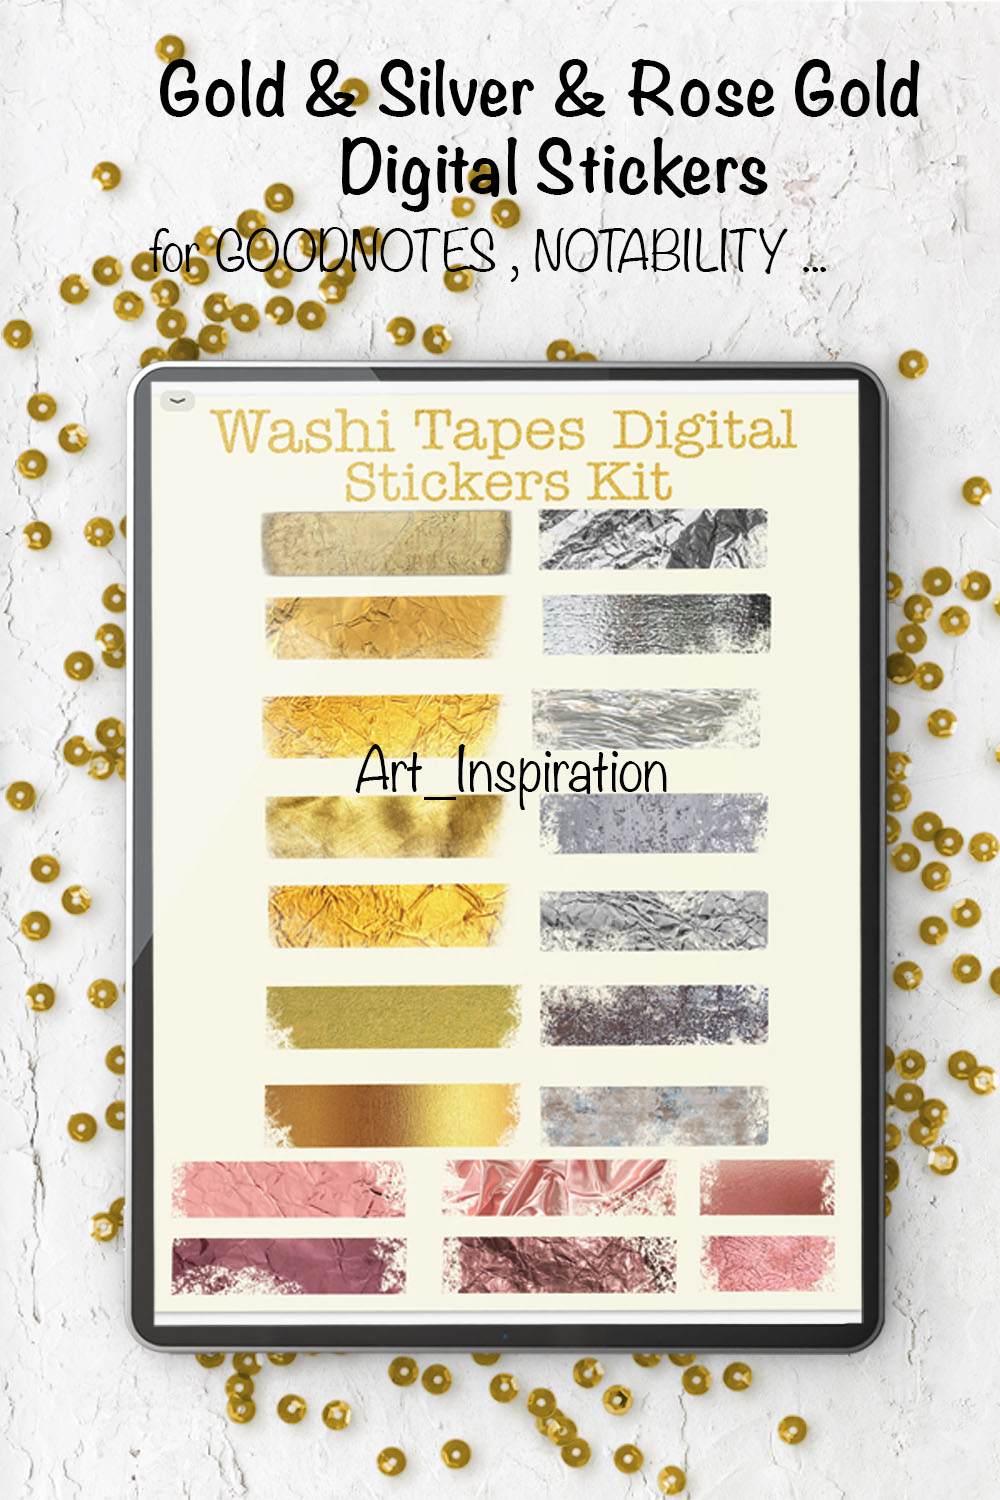 Rose Gold Washi Tape Digital Stickers Stickers for Goodnotes and